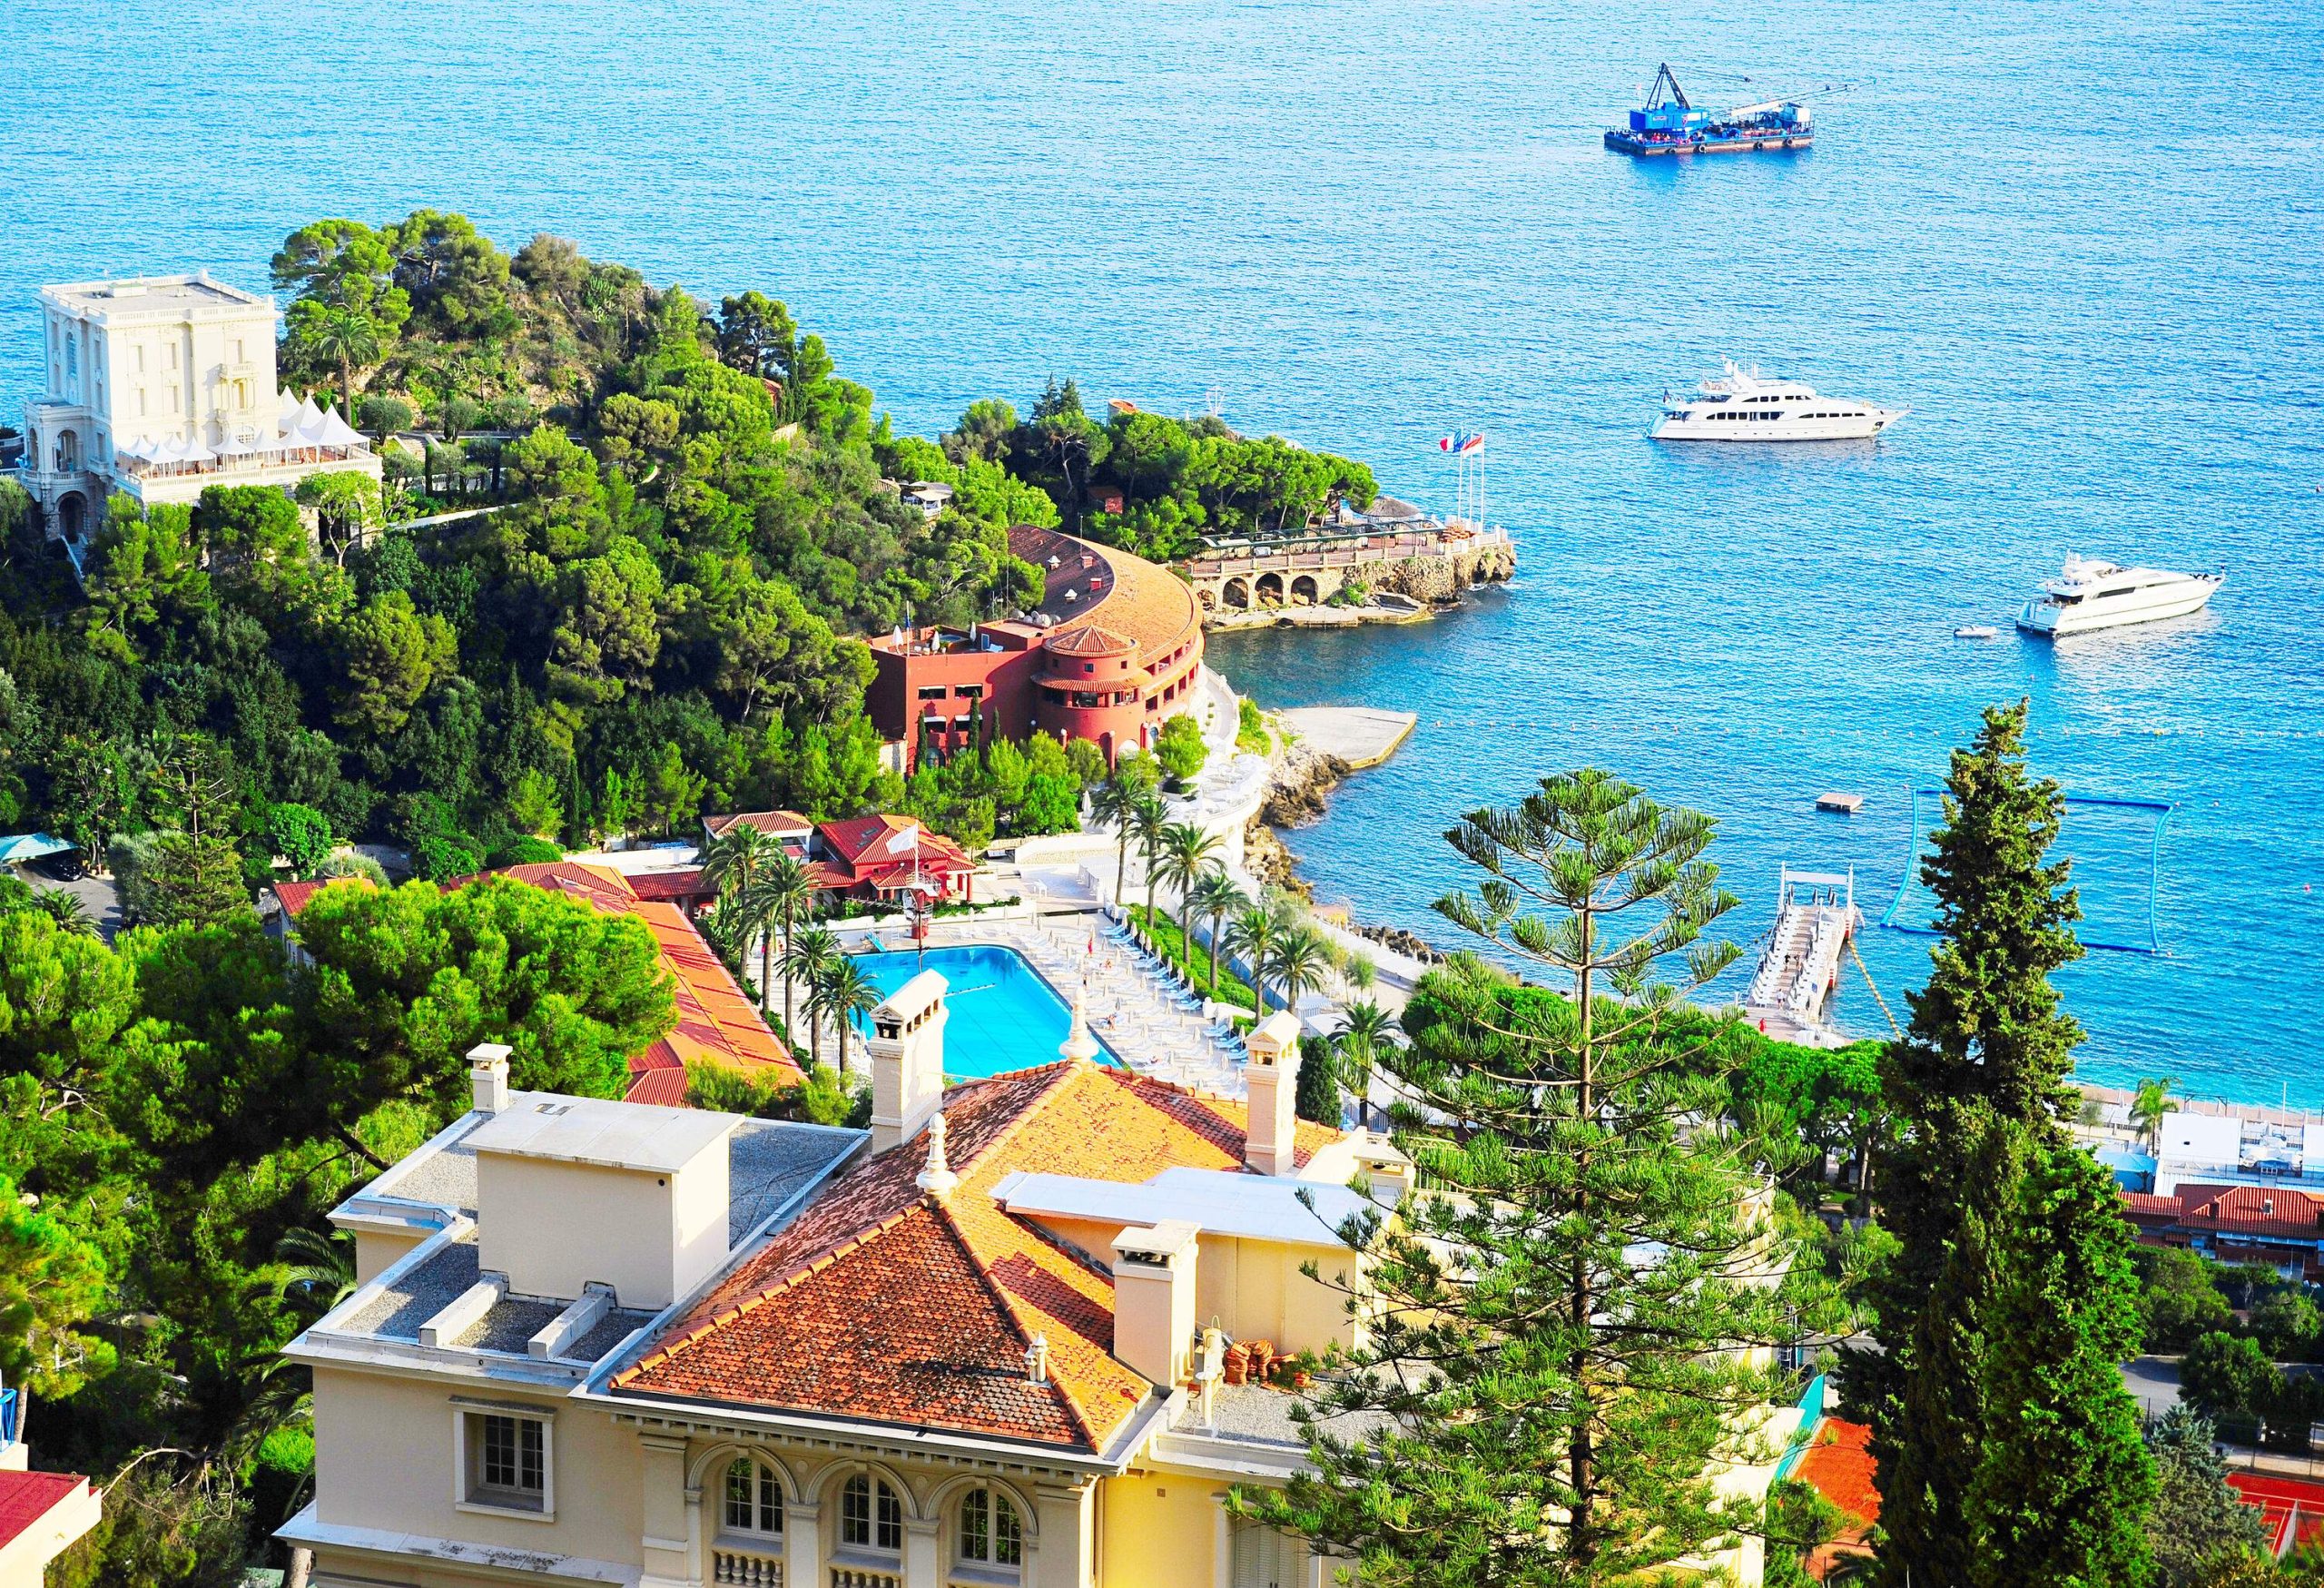 A destination resort with beautiful villas overlooking the boats sailing across the blue sea.